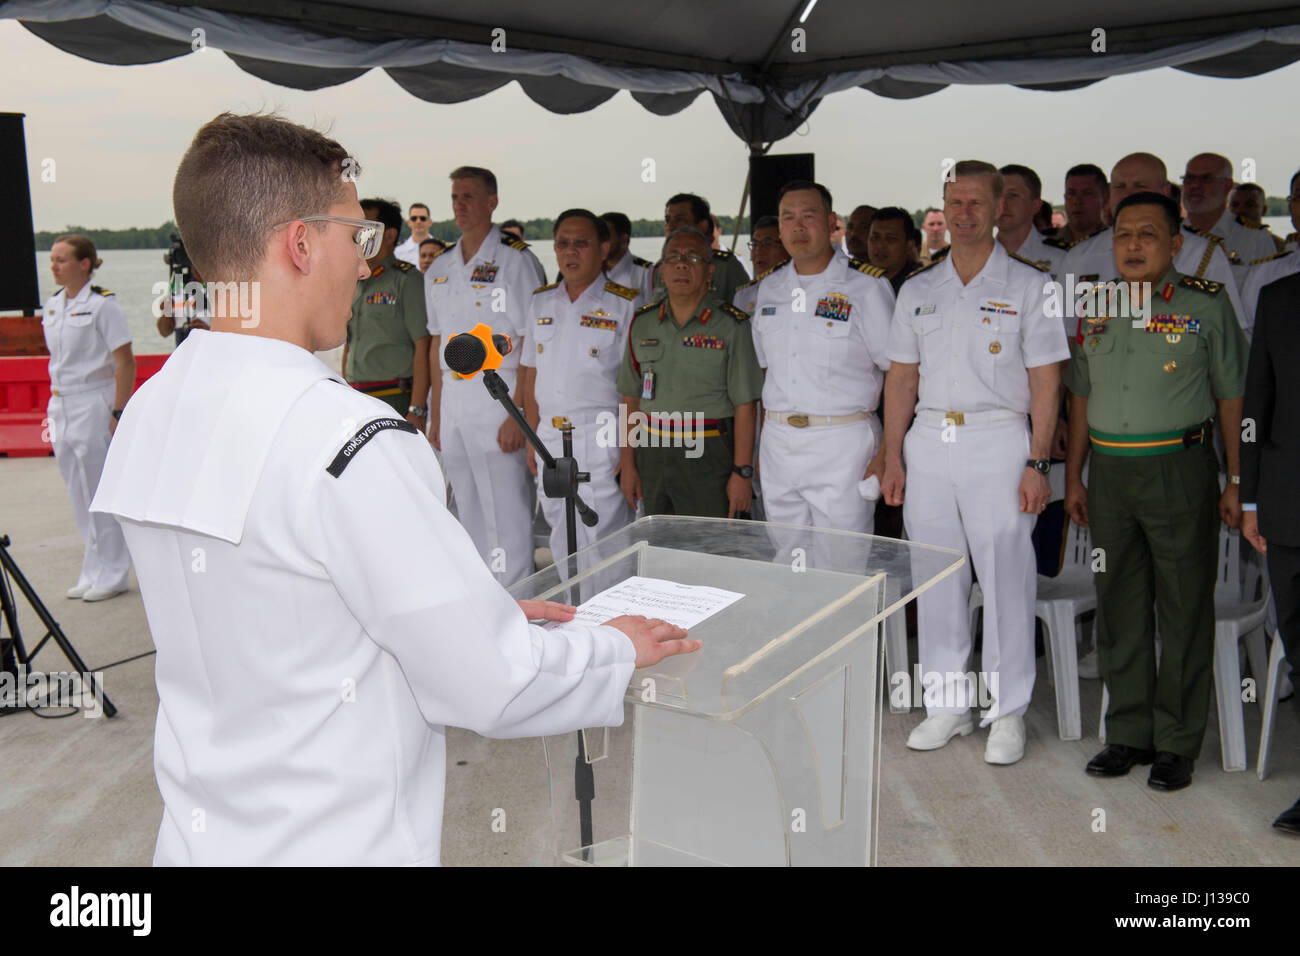 170410-N-SF984-005   PORT KLANG, Malaysia (April 10, 2017) Musician 2nd Class Holden Moyer of the U.S. 7th Fleet Band sings the Malaysian and United States national anthems during the opening ceremony for Pacific Partnership 2017 Malaysia on the pier. Pacific Partnership is the largest annual multilateral humanitarian assistance and disaster relief preparedness mission conducted in the Indo-Asia-Pacific and aims to enhance regional coordination in areas such as medical readiness and preparedness for manmade and natural disasters. (U.S. Navy photo by Mass Communication Specialist 2nd Class Chel Stock Photo